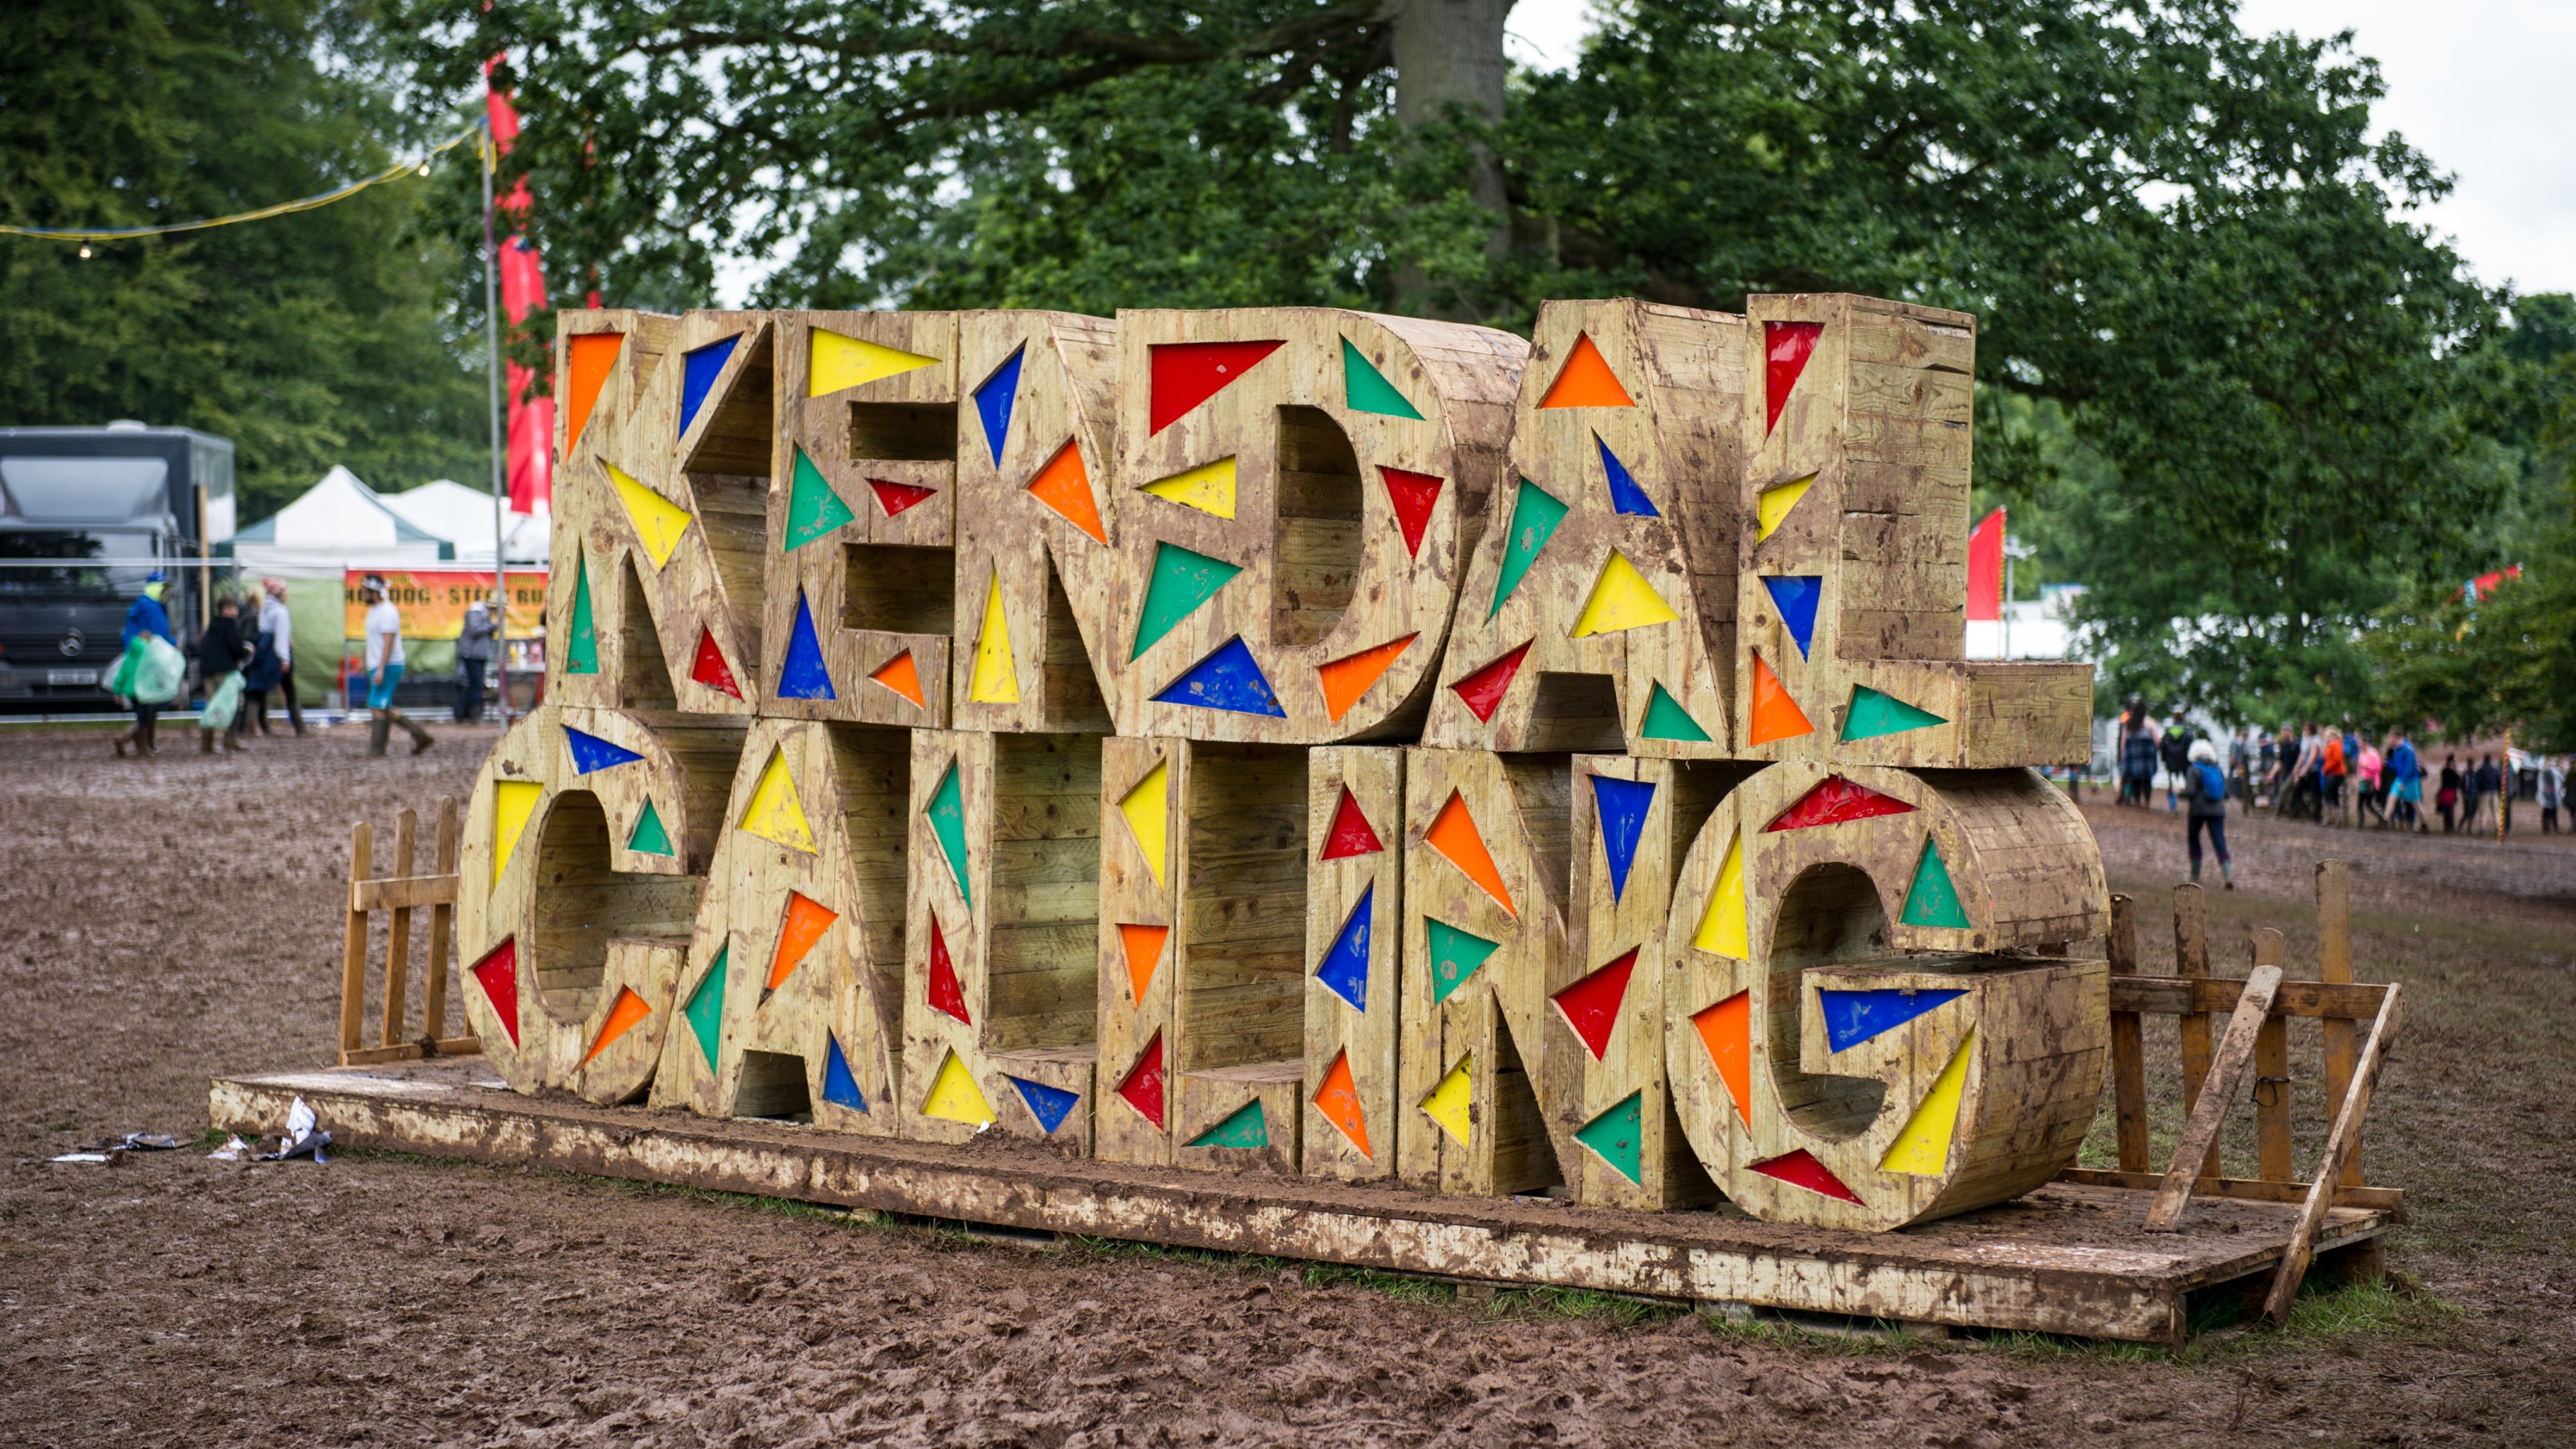 Kendal Calling 2023 line-up revealed with Kasabian, Royal Blood, Blossoms,  Nile Rodgers and CHIC headlining